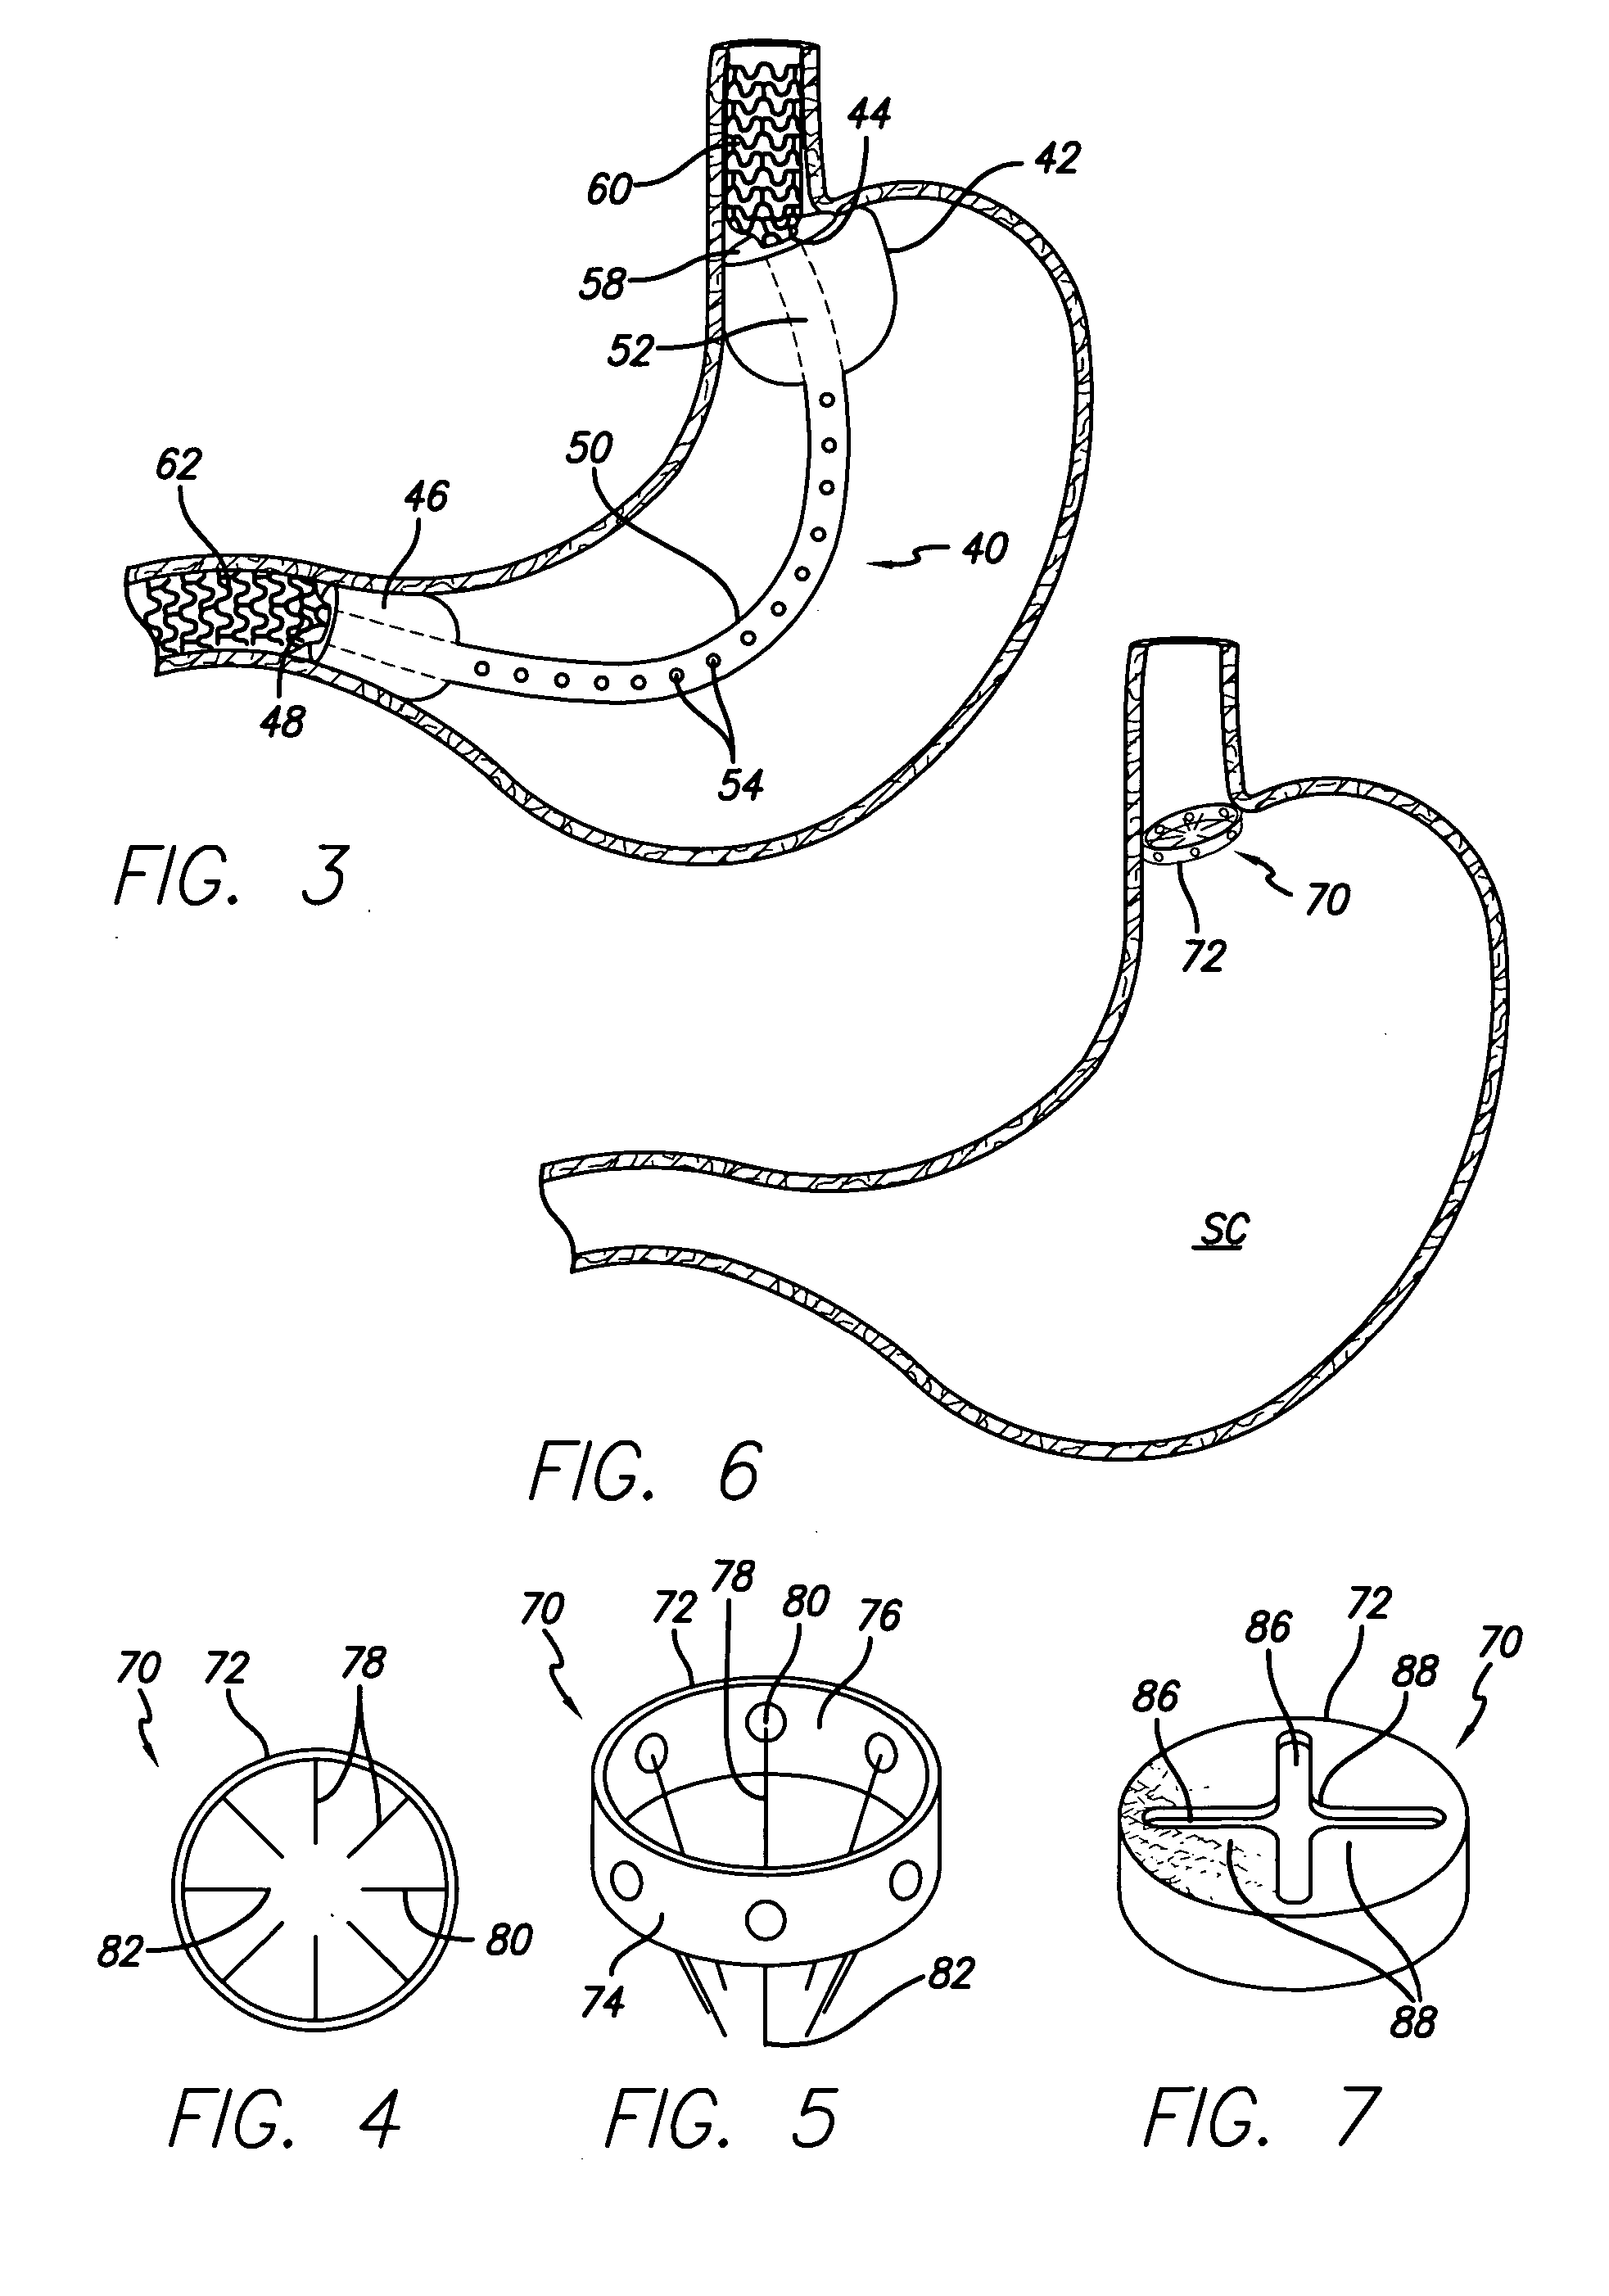 Systems and methods for treating obesity